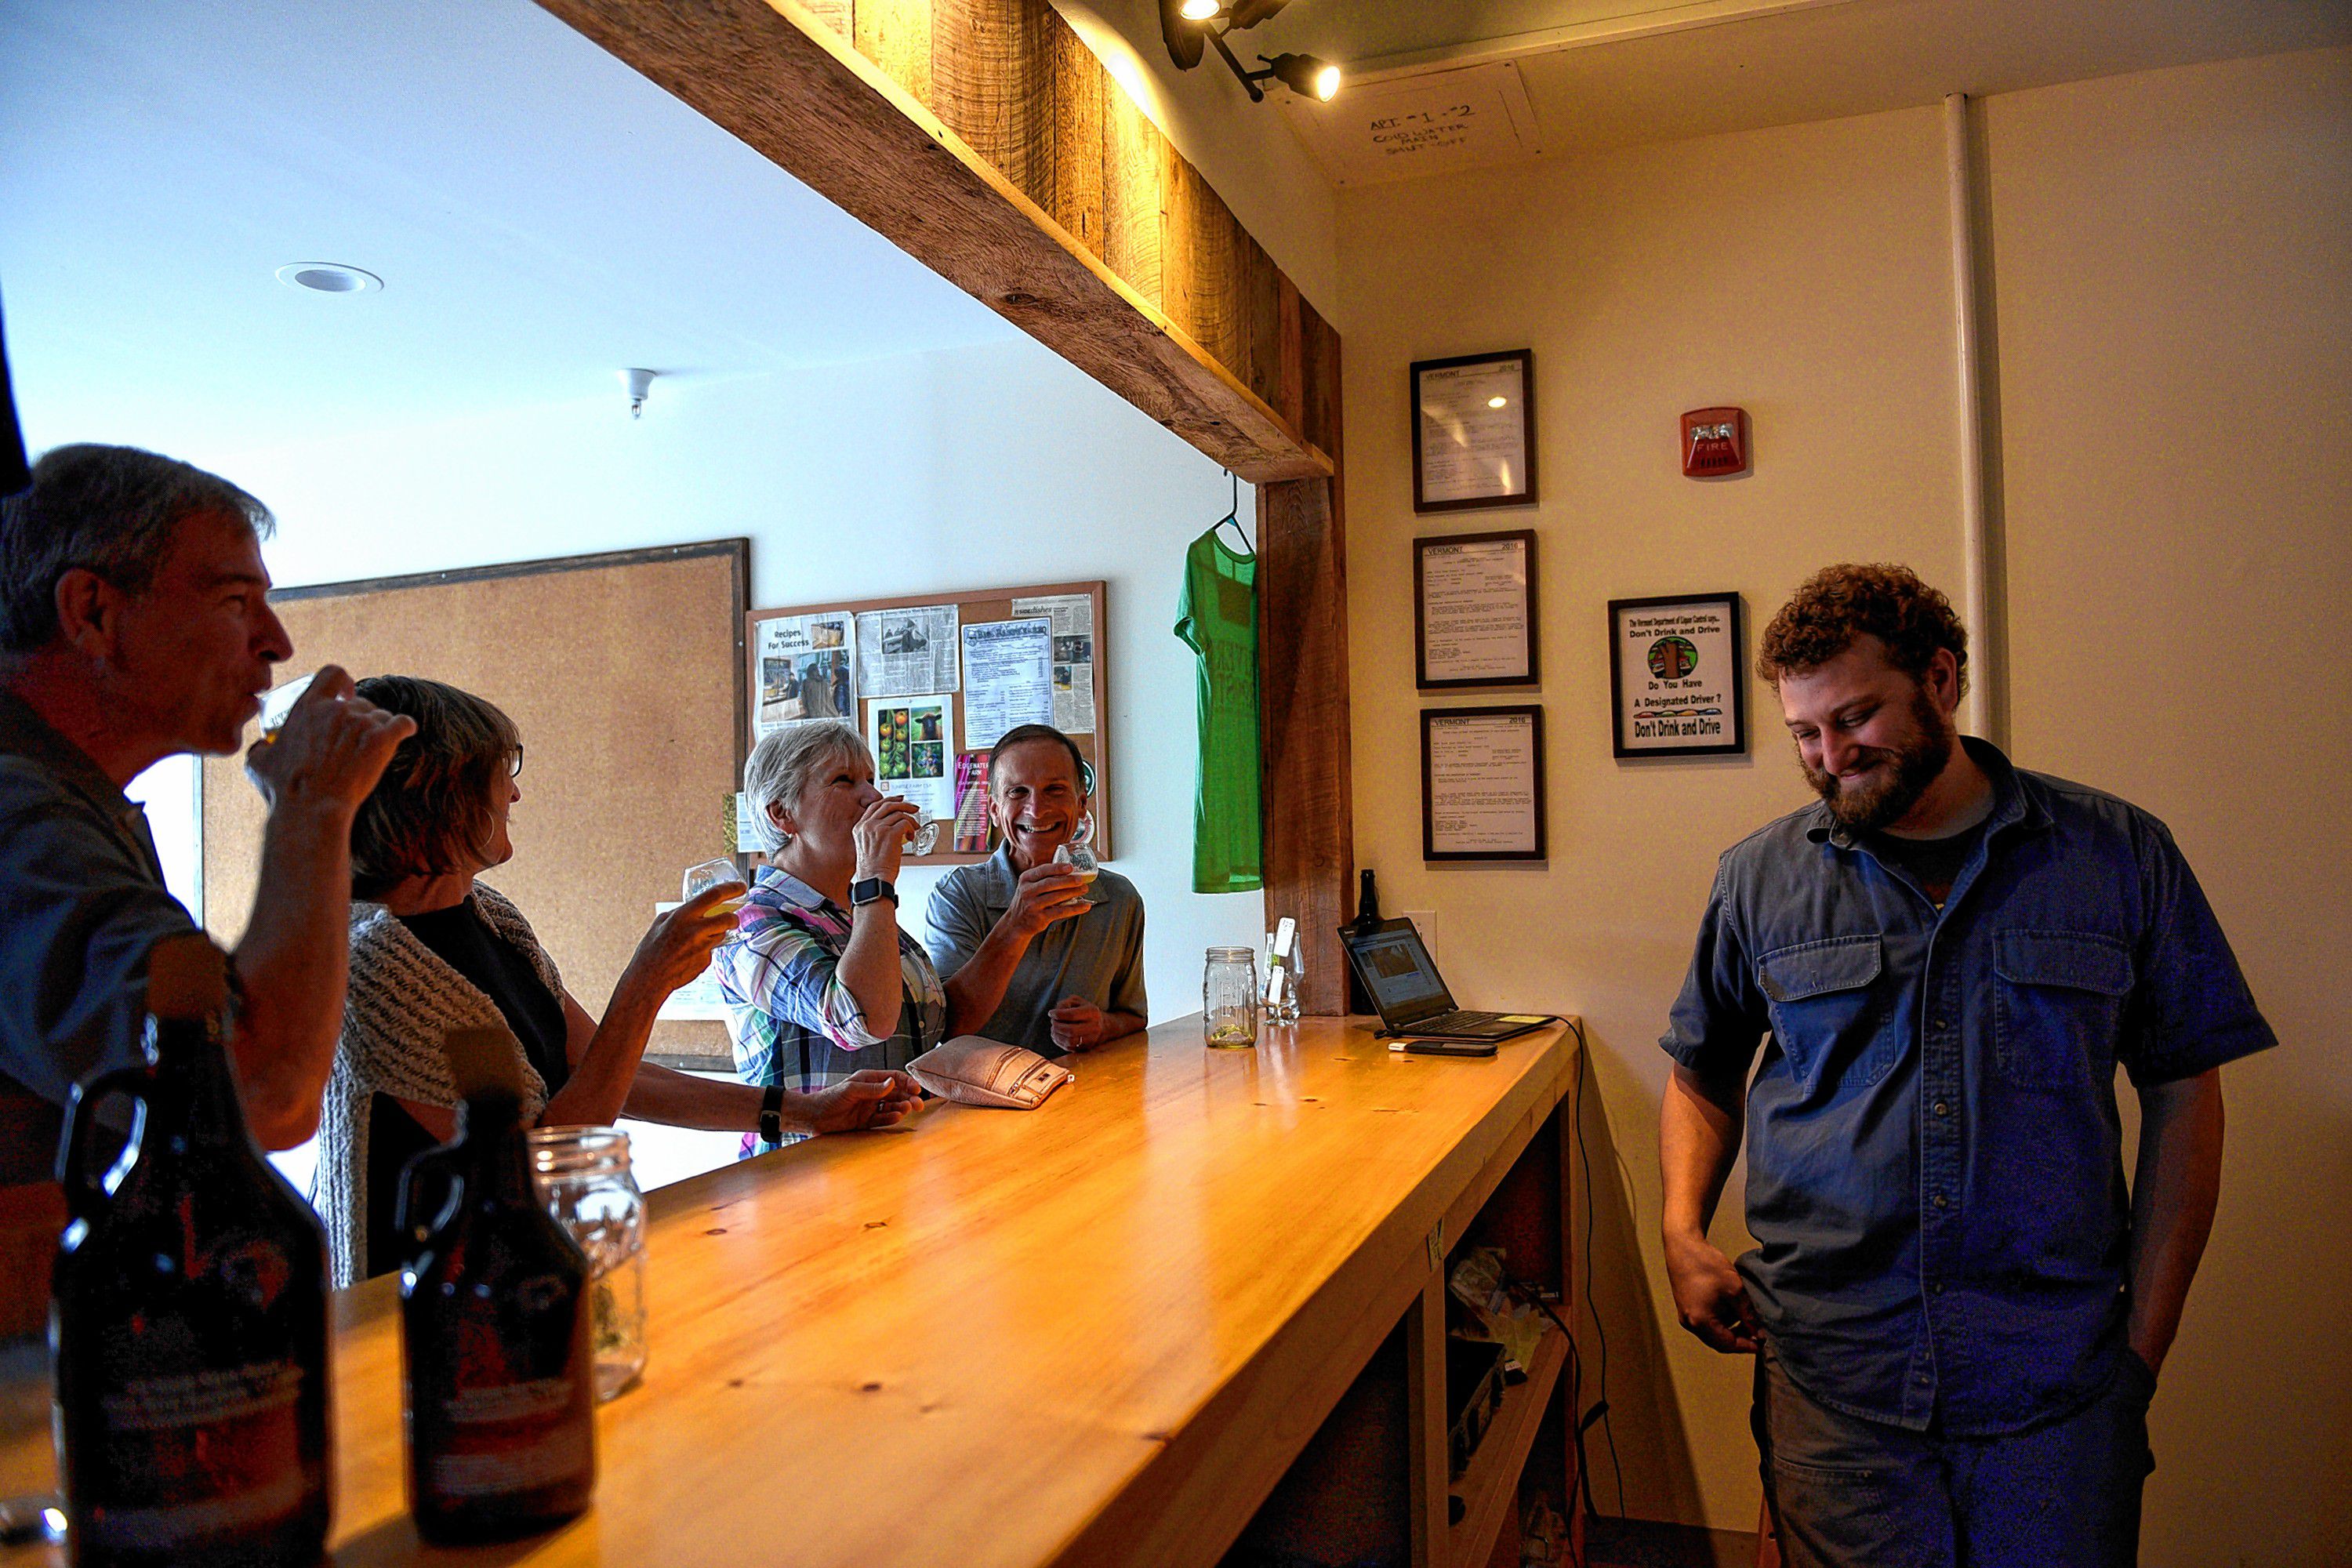 Doug Larison, left, his wife, Renee Larison; Dawn Larison and her husband, Ted Larison, all from Cortland, N.Y., all sample beer from River Roost Brewery in White River Junction, Vt., on Sept. 14, 2016. Brewery owner Mark Babson is pouring the samples. (Valley News - Jennifer Hauck) Copyright Valley News. May not be reprinted or used online without permission. Send requests to permission@vnews.com.